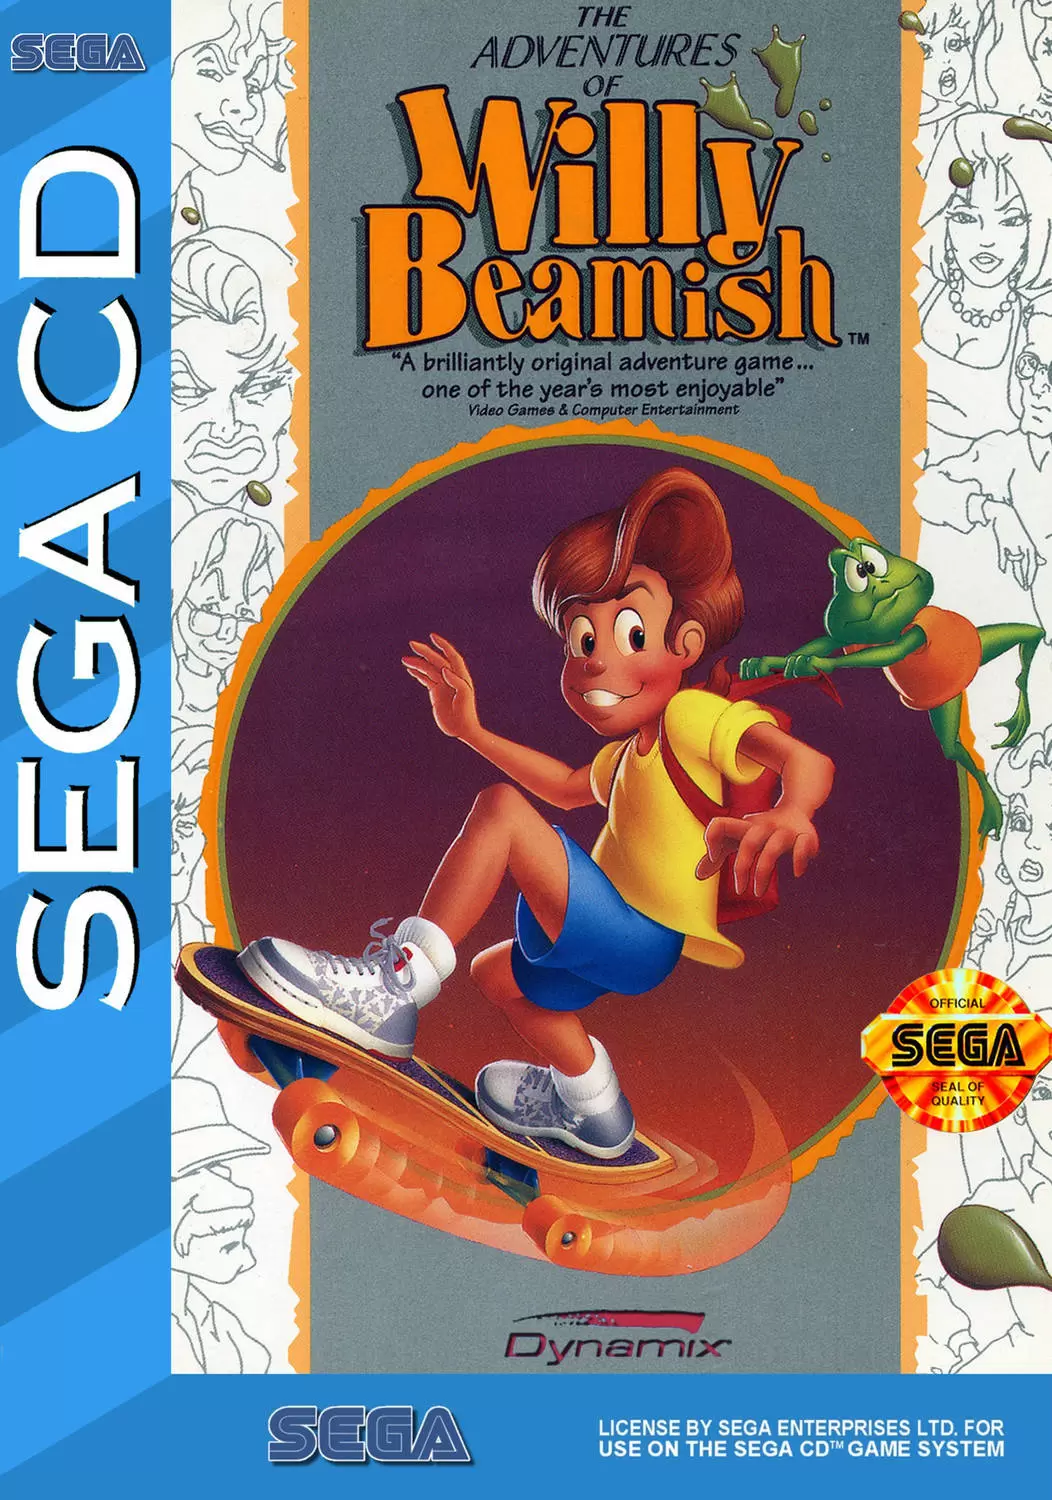 Jeux SEGA Mega CD - The Adventures of Willy Beamish